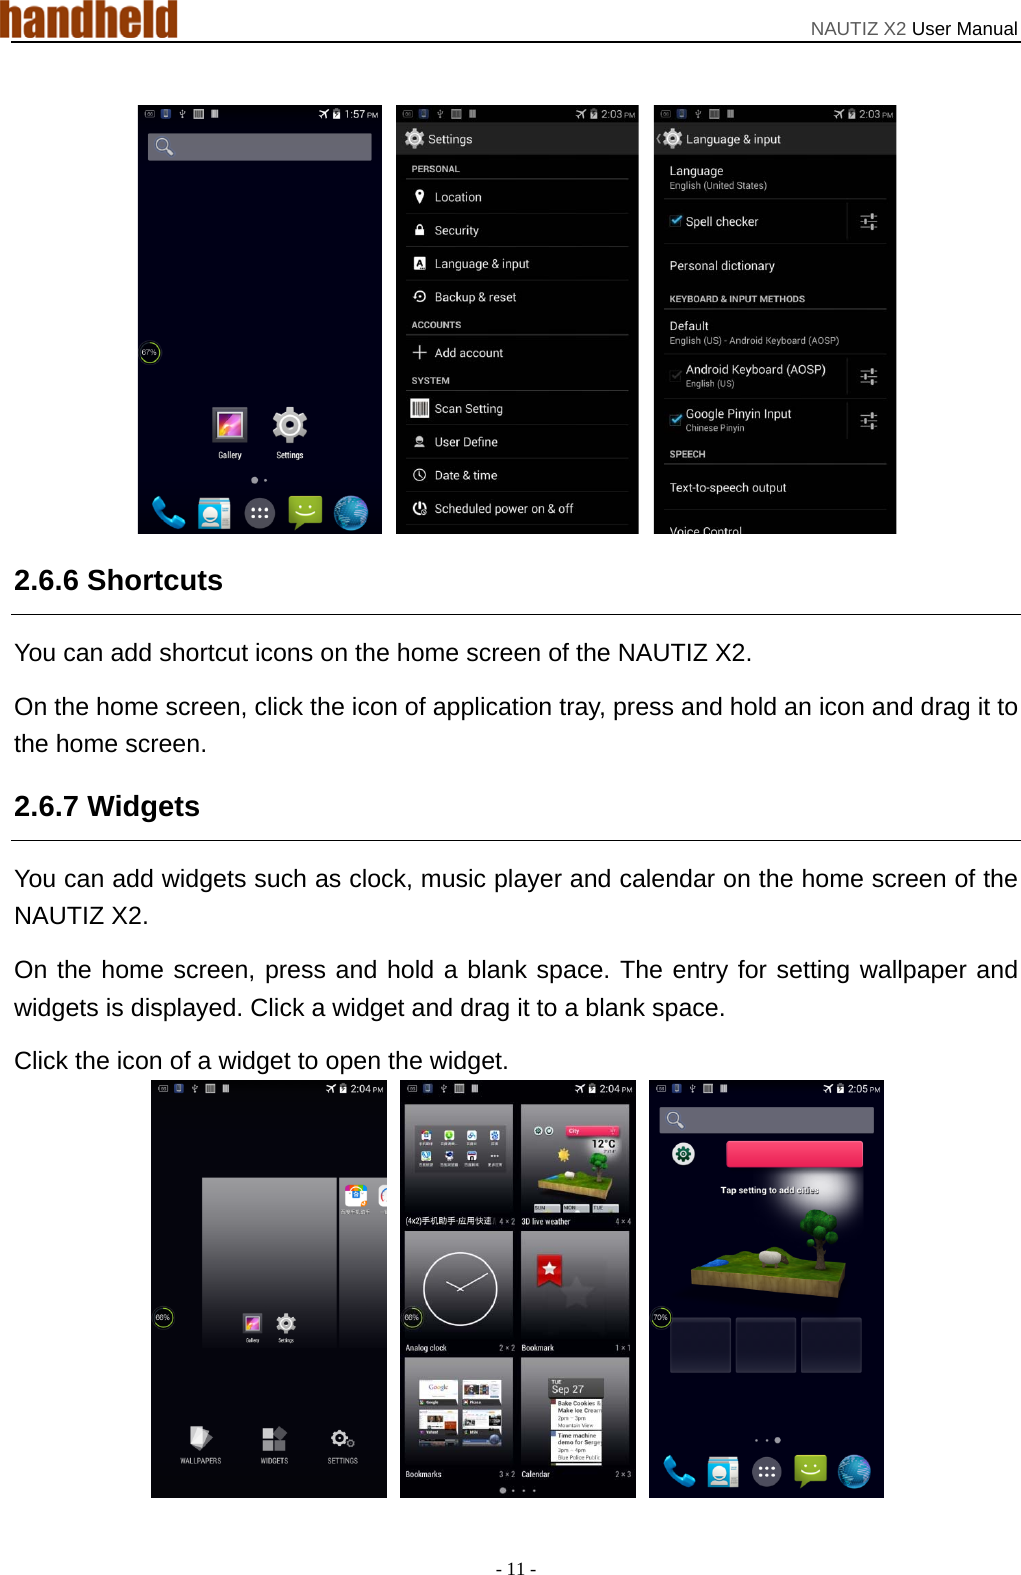 NAUTIZ X2 User Manual - 11 -    2.6.6 Shortcuts You can add shortcut icons on the home screen of the NAUTIZ X2. On the home screen, click the icon of application tray, press and hold an icon and drag it to the home screen.   2.6.7 Widgets   You can add widgets such as clock, music player and calendar on the home screen of the NAUTIZ X2.   On the home screen, press and hold a blank space. The entry for setting wallpaper and widgets is displayed. Click a widget and drag it to a blank space.   Click the icon of a widget to open the widget.    